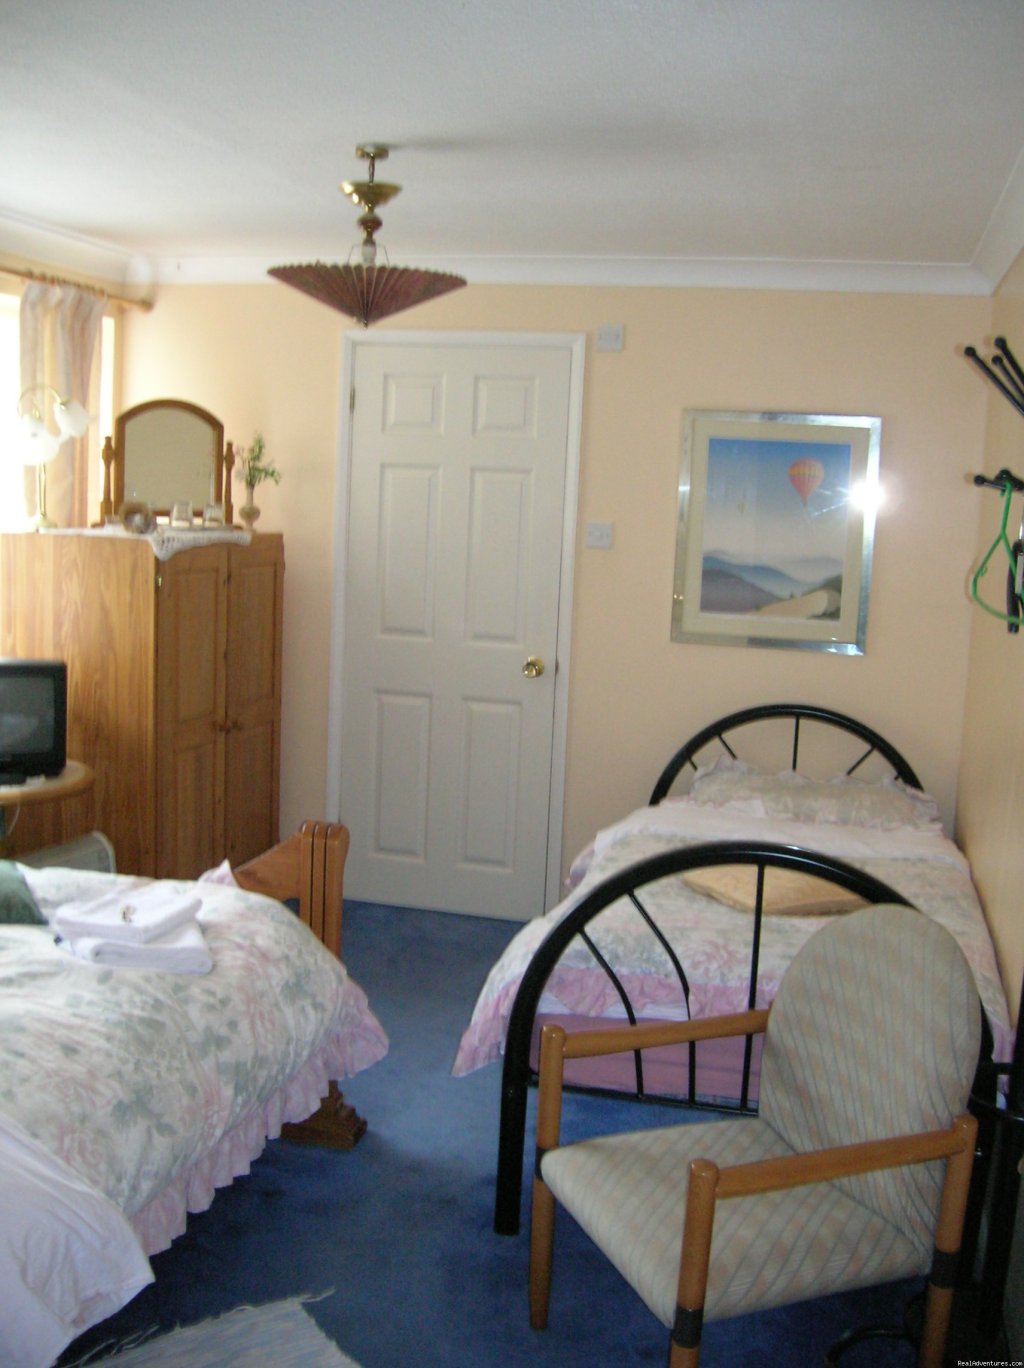 Family room sleeps upto 5 persons | Beautiful Guest house / b&b near Gatwick airport | Image #6/7 | 